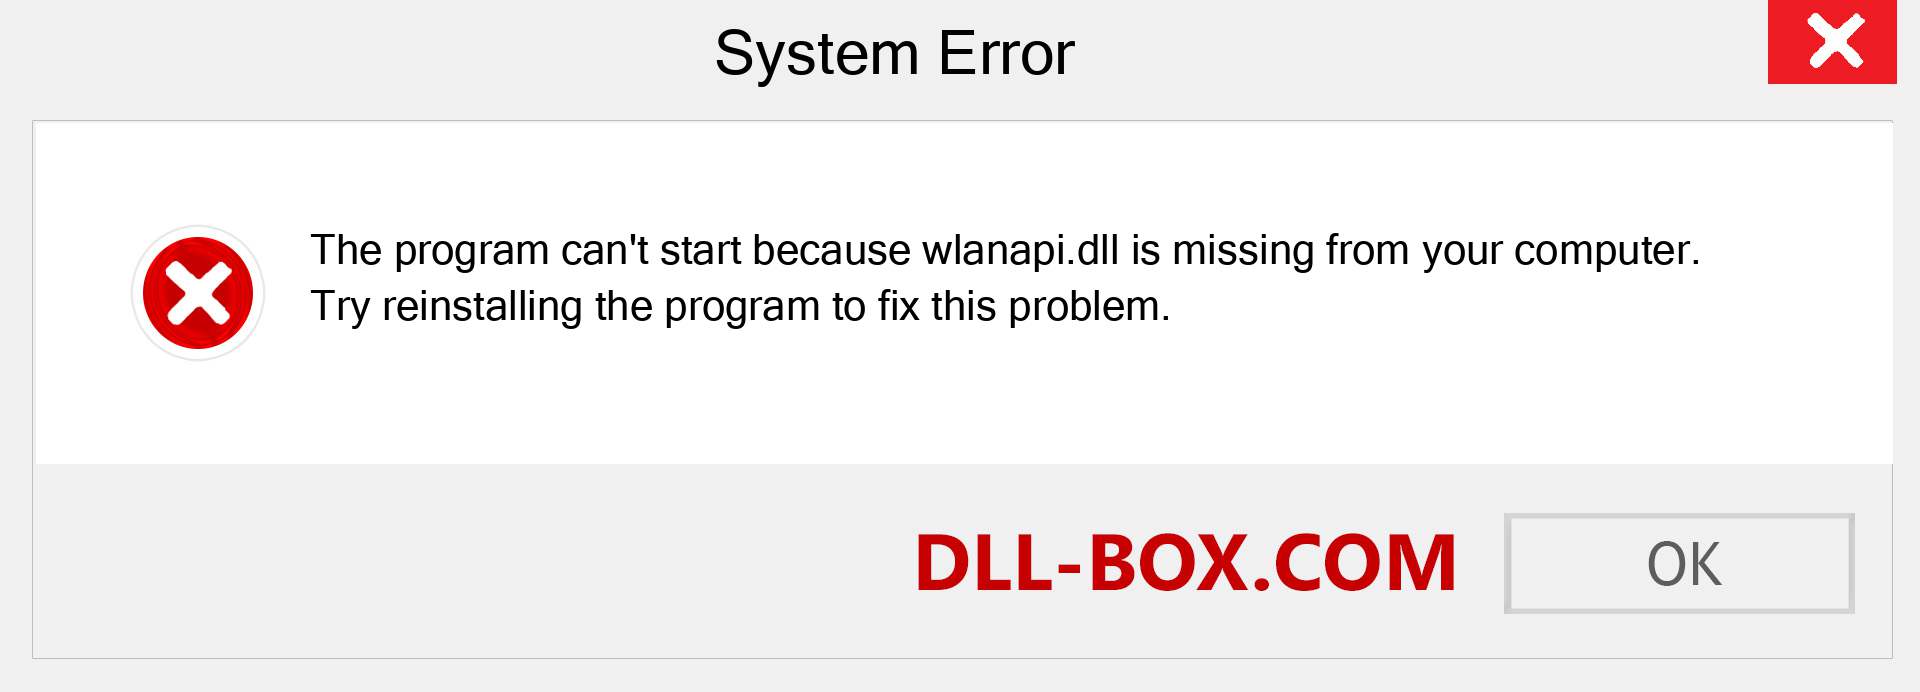  wlanapi.dll file is missing?. Download for Windows 7, 8, 10 - Fix  wlanapi dll Missing Error on Windows, photos, images